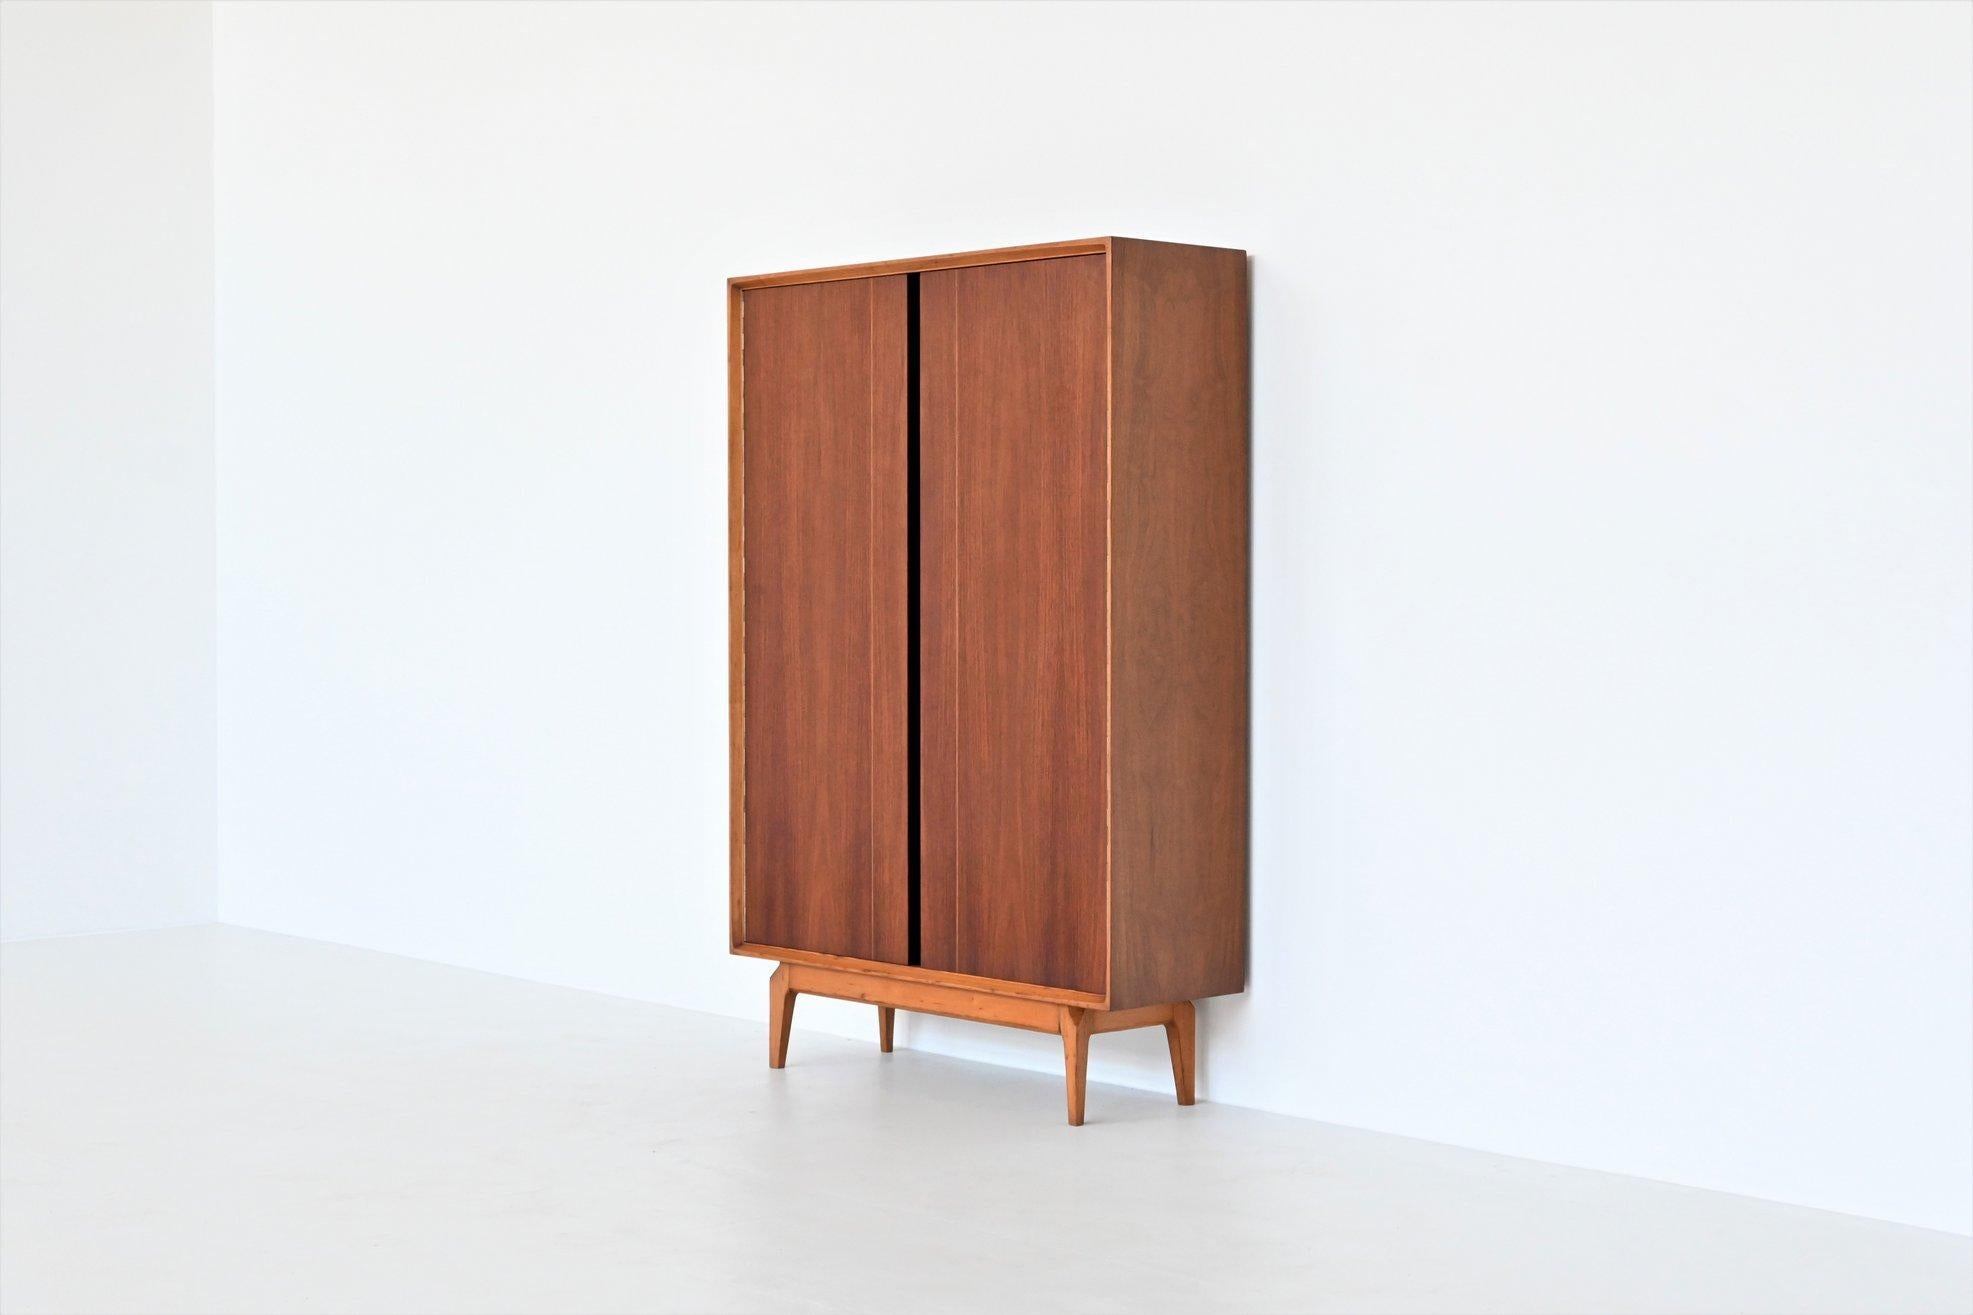 Beautiful and very rare high cabinet model Madison designed by Fred Sandra and manufactured by De Coene, Belgium 1960. This well-crafted cabinet is produced in rosewood and walnut. It has a very nice and warm grain to the rosewood veneered doors.